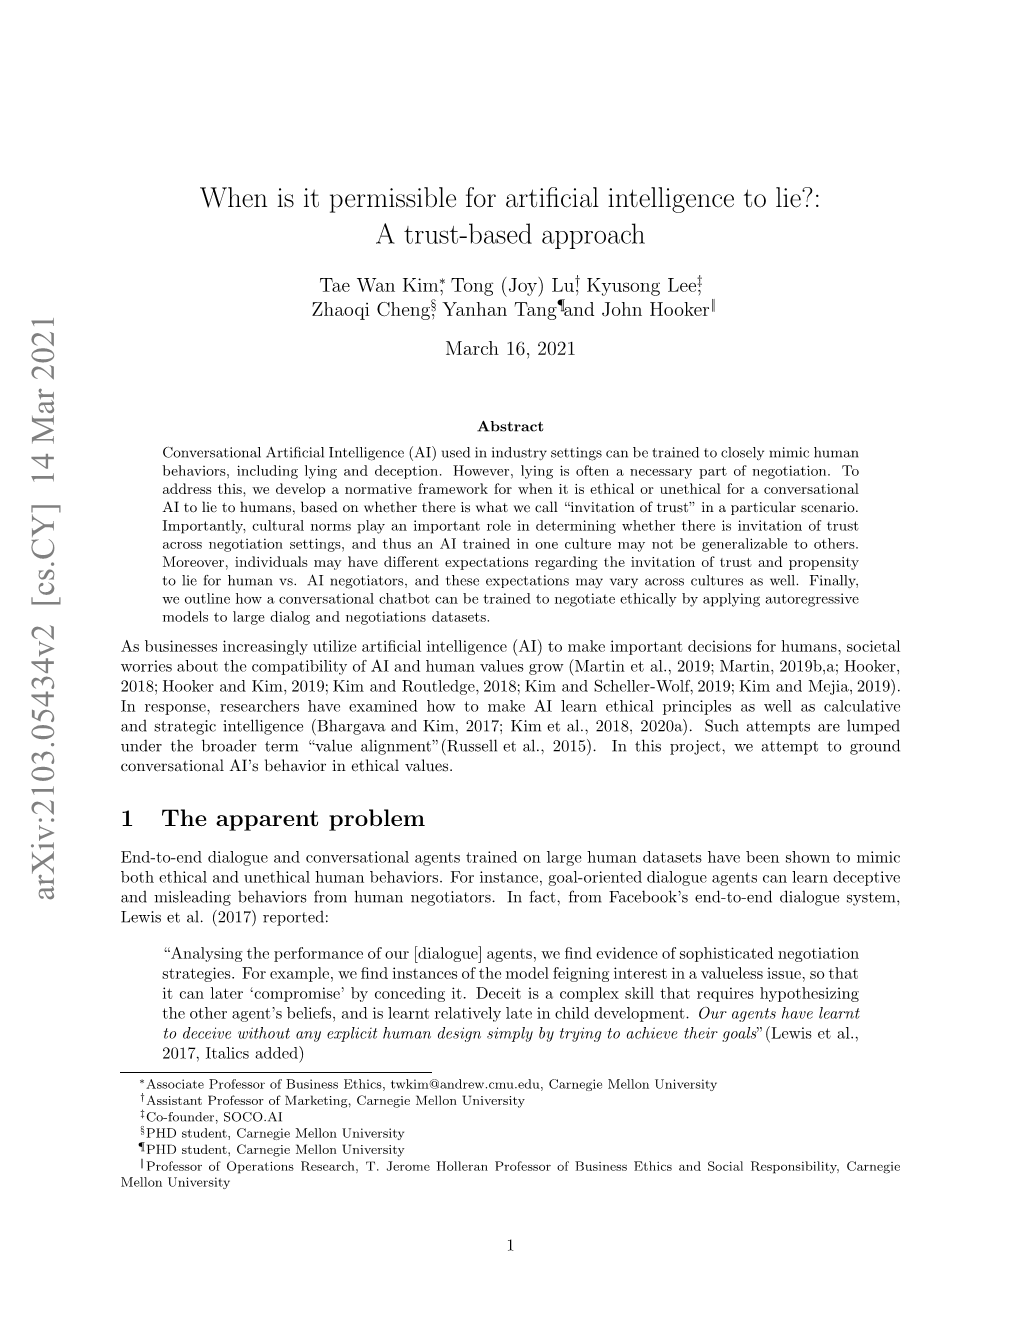 When Is It Permissible for Artificial Intelligence to Lie?: a Trust-Based Approach